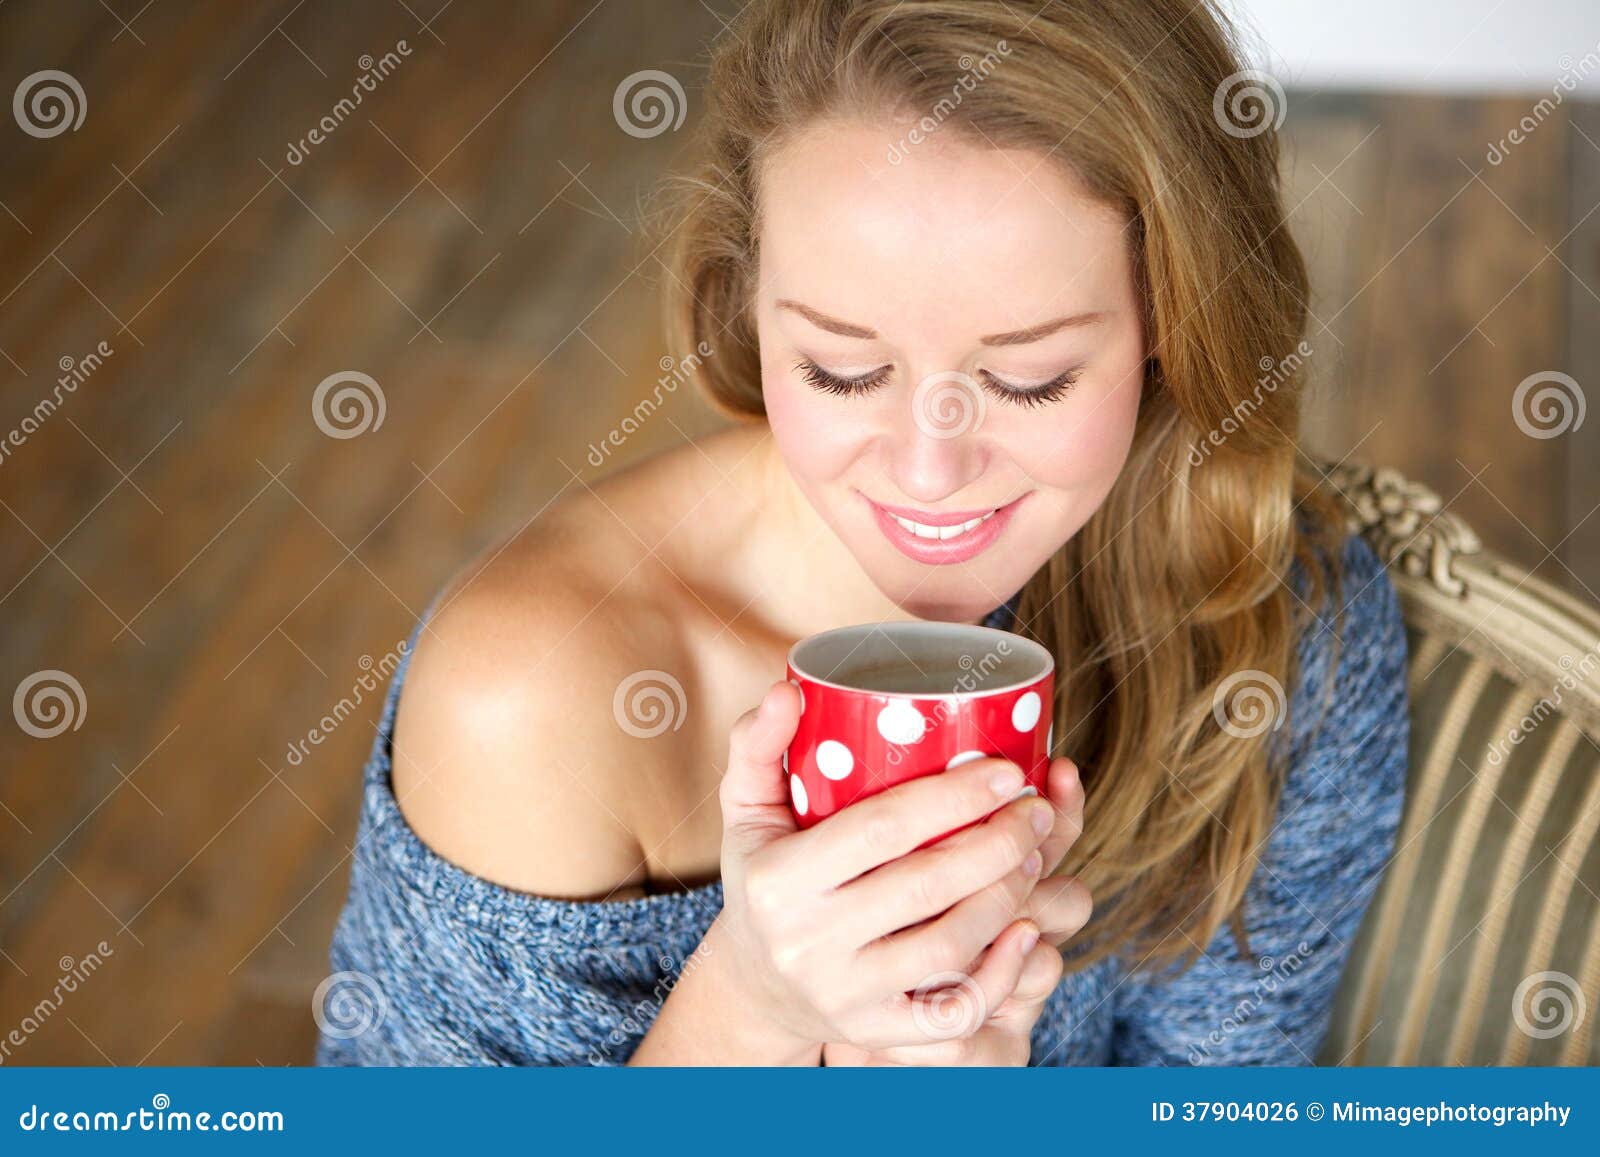 Young Woman Enjoying Cup Of Tea At Home Stock Photo - Image of holding ...